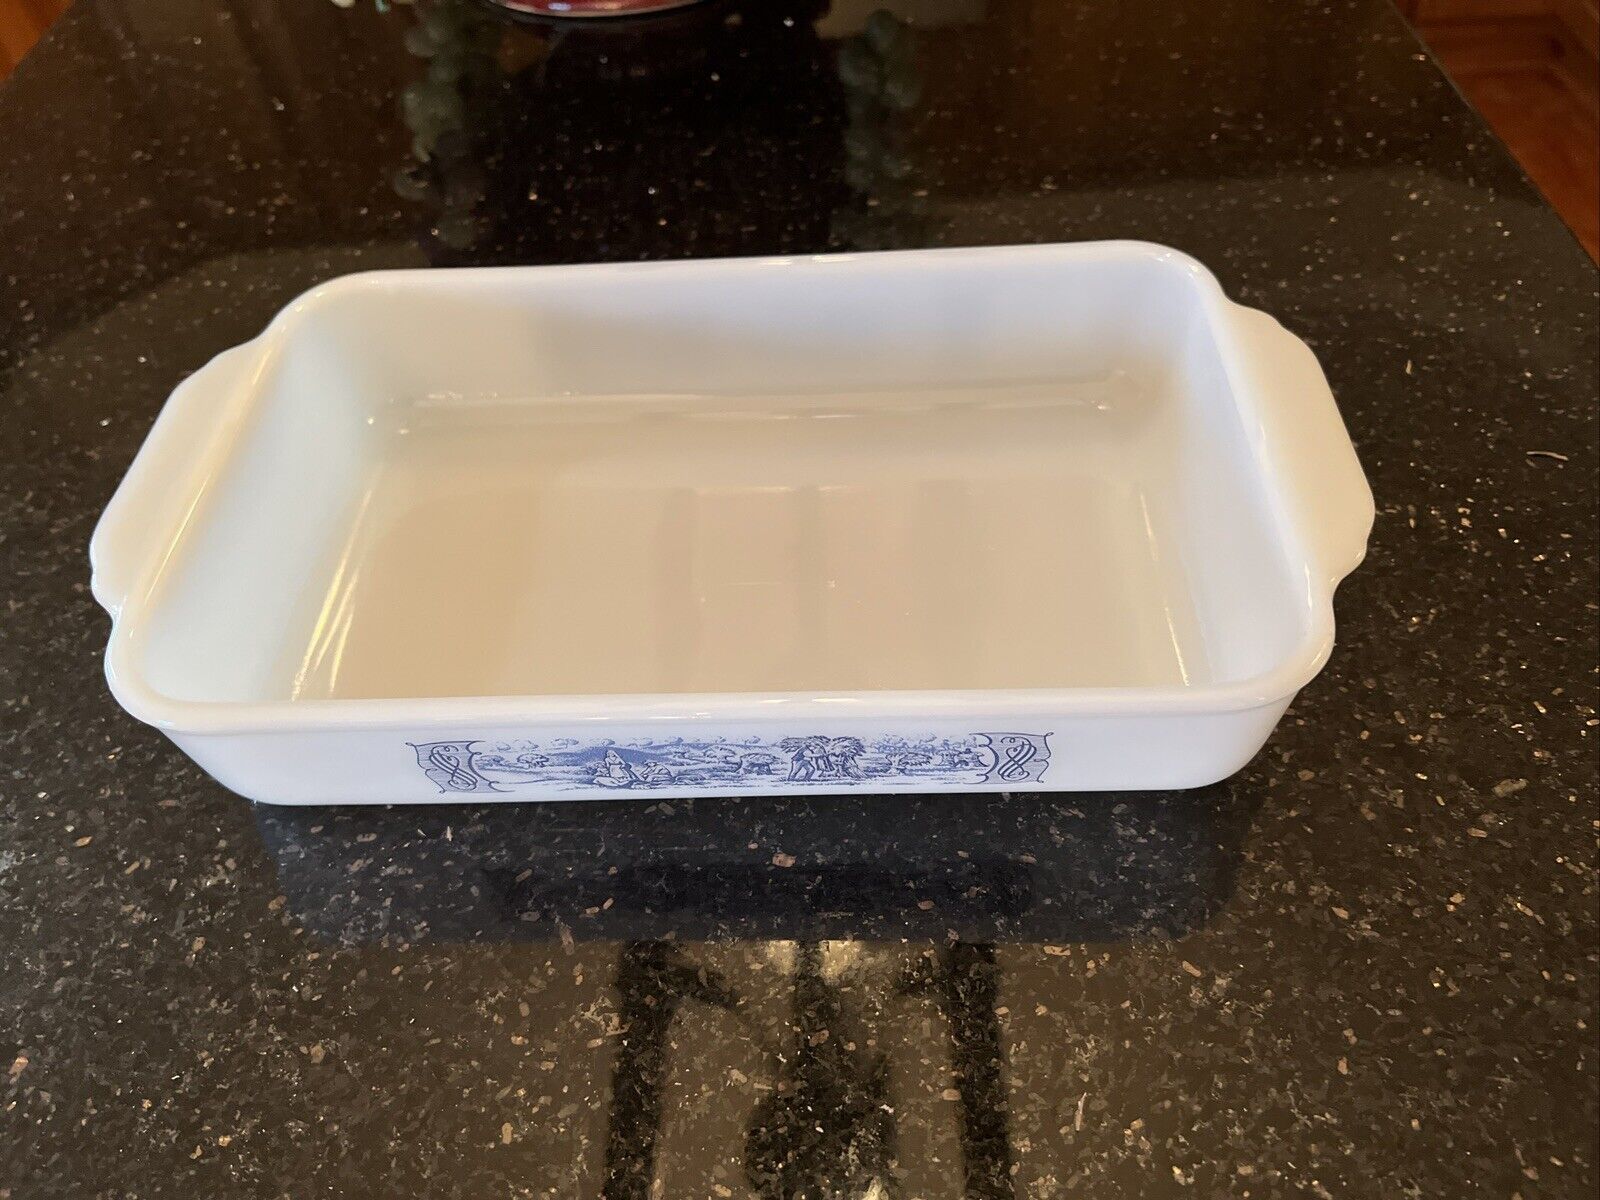 VTG Royal Currier and Ives 10-inch White Rectangle Baking Dish